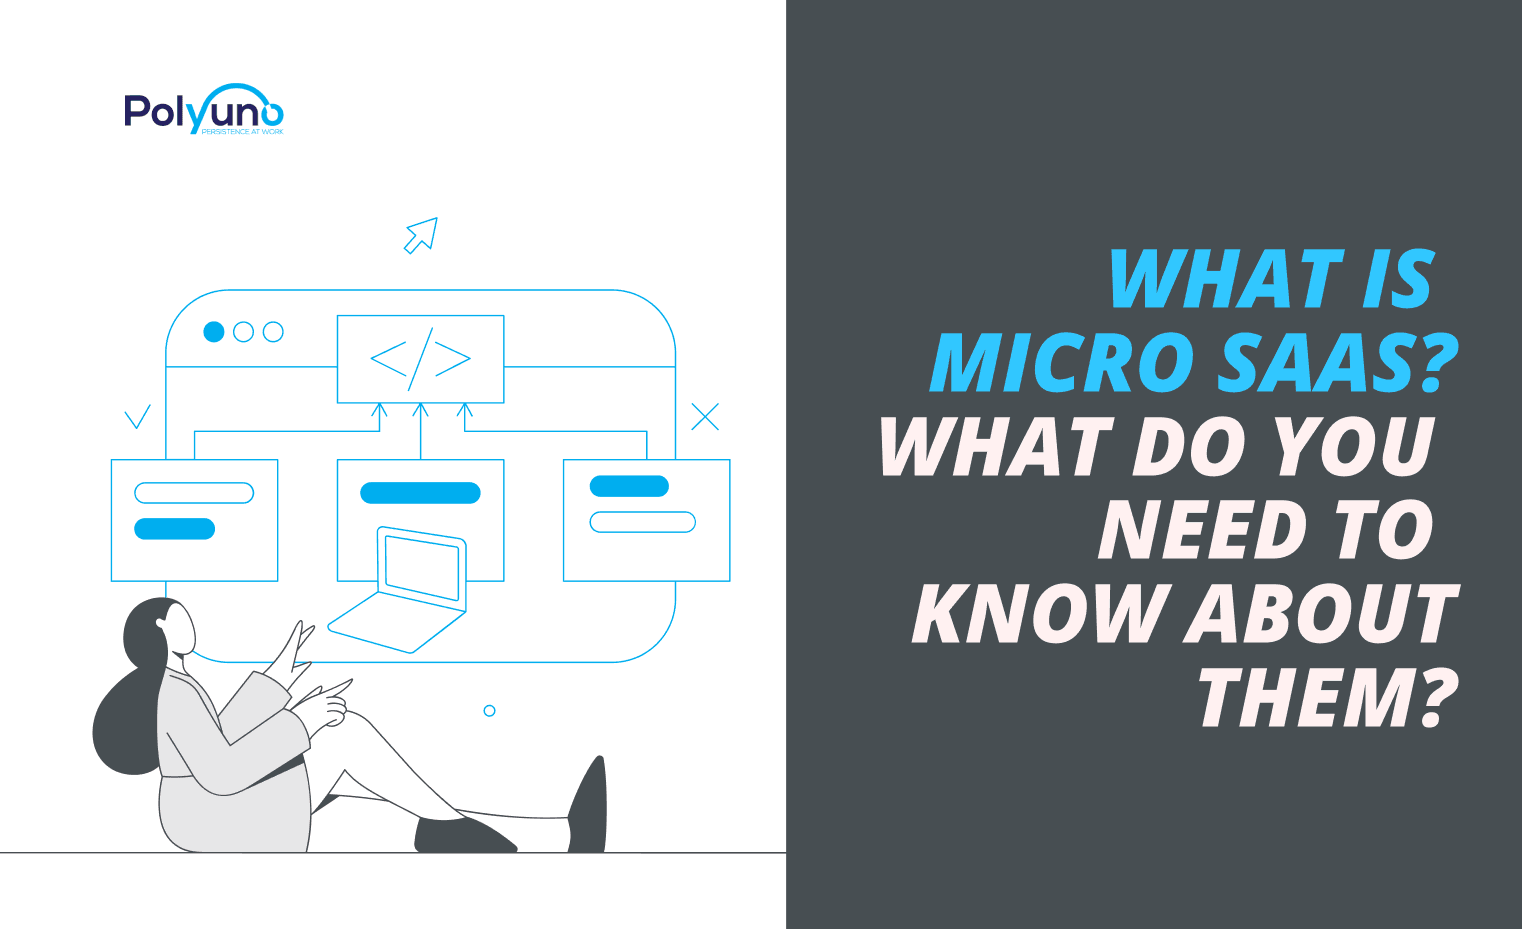 What Is Micro SaaS? What Do You Need To Know About Them?